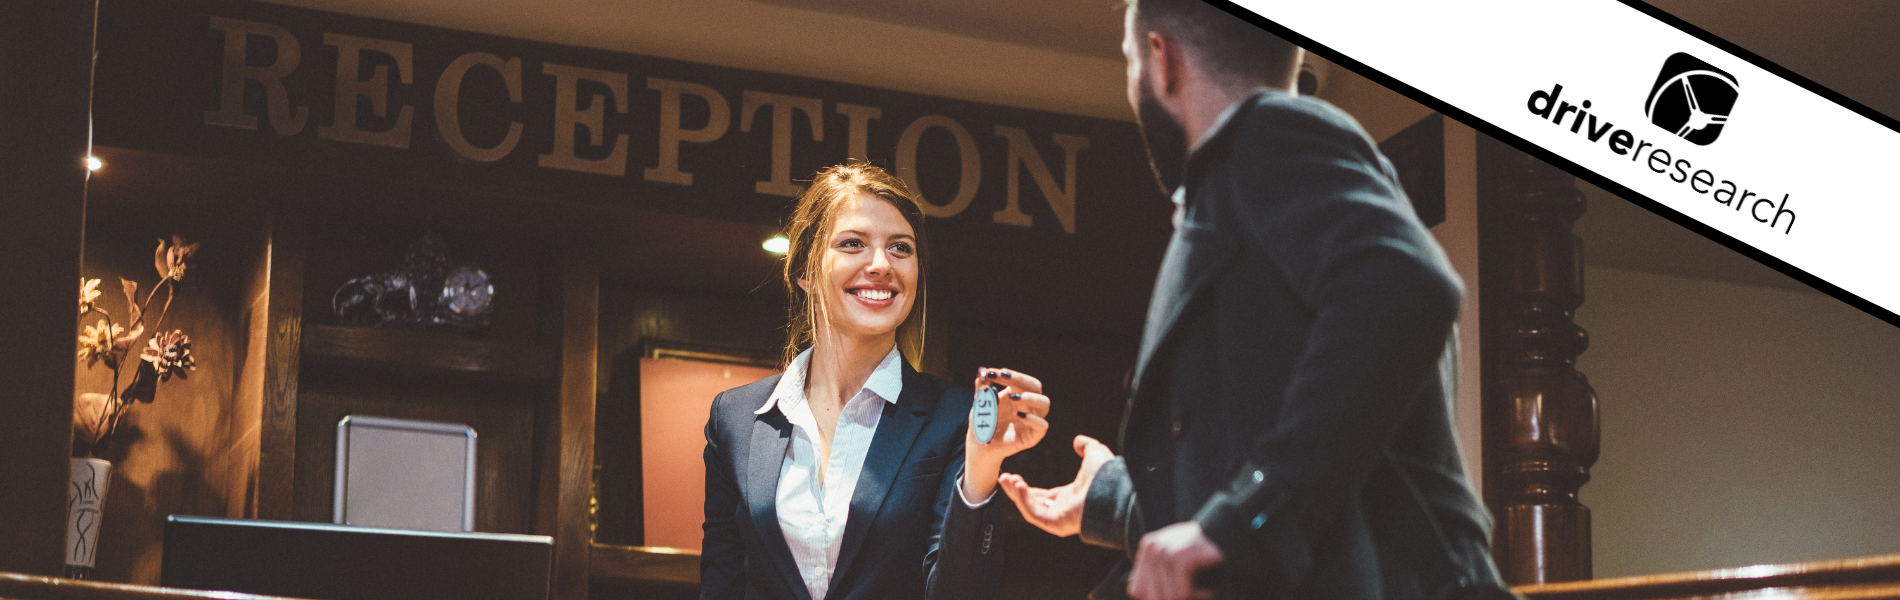 woman working at a hotel handing a guest his keys